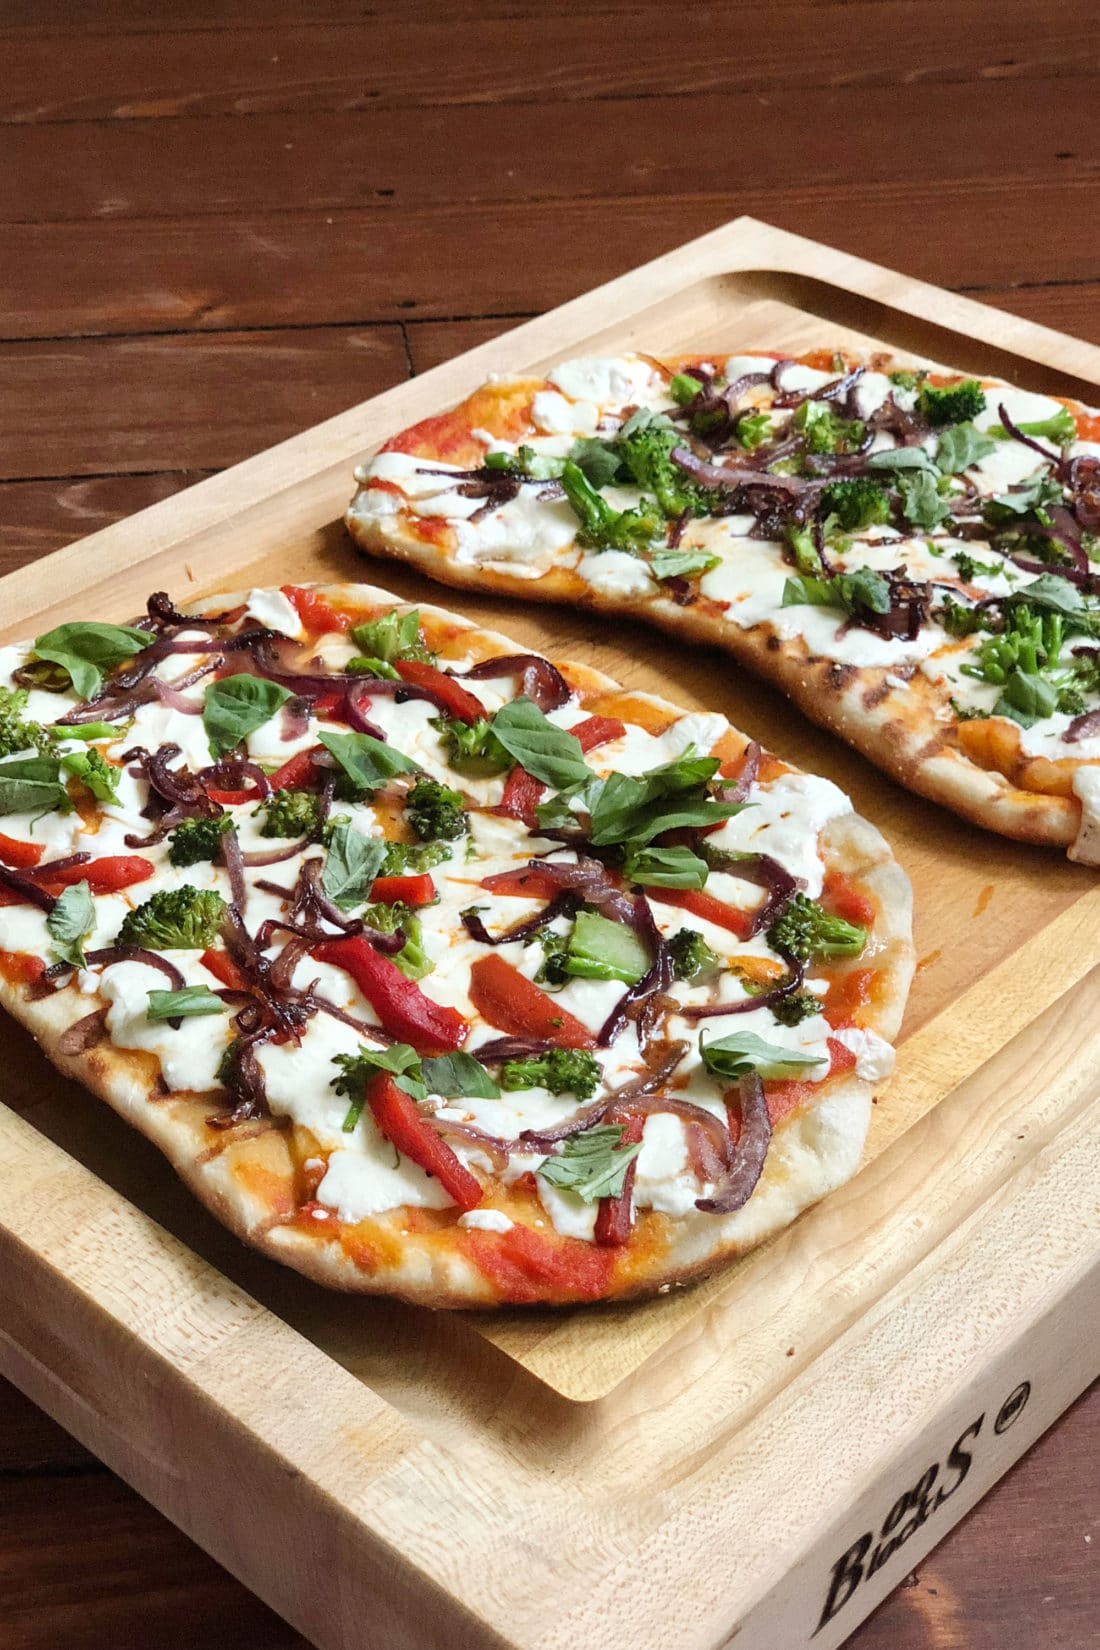 Two Grilled Pizzas on a wooden tray.